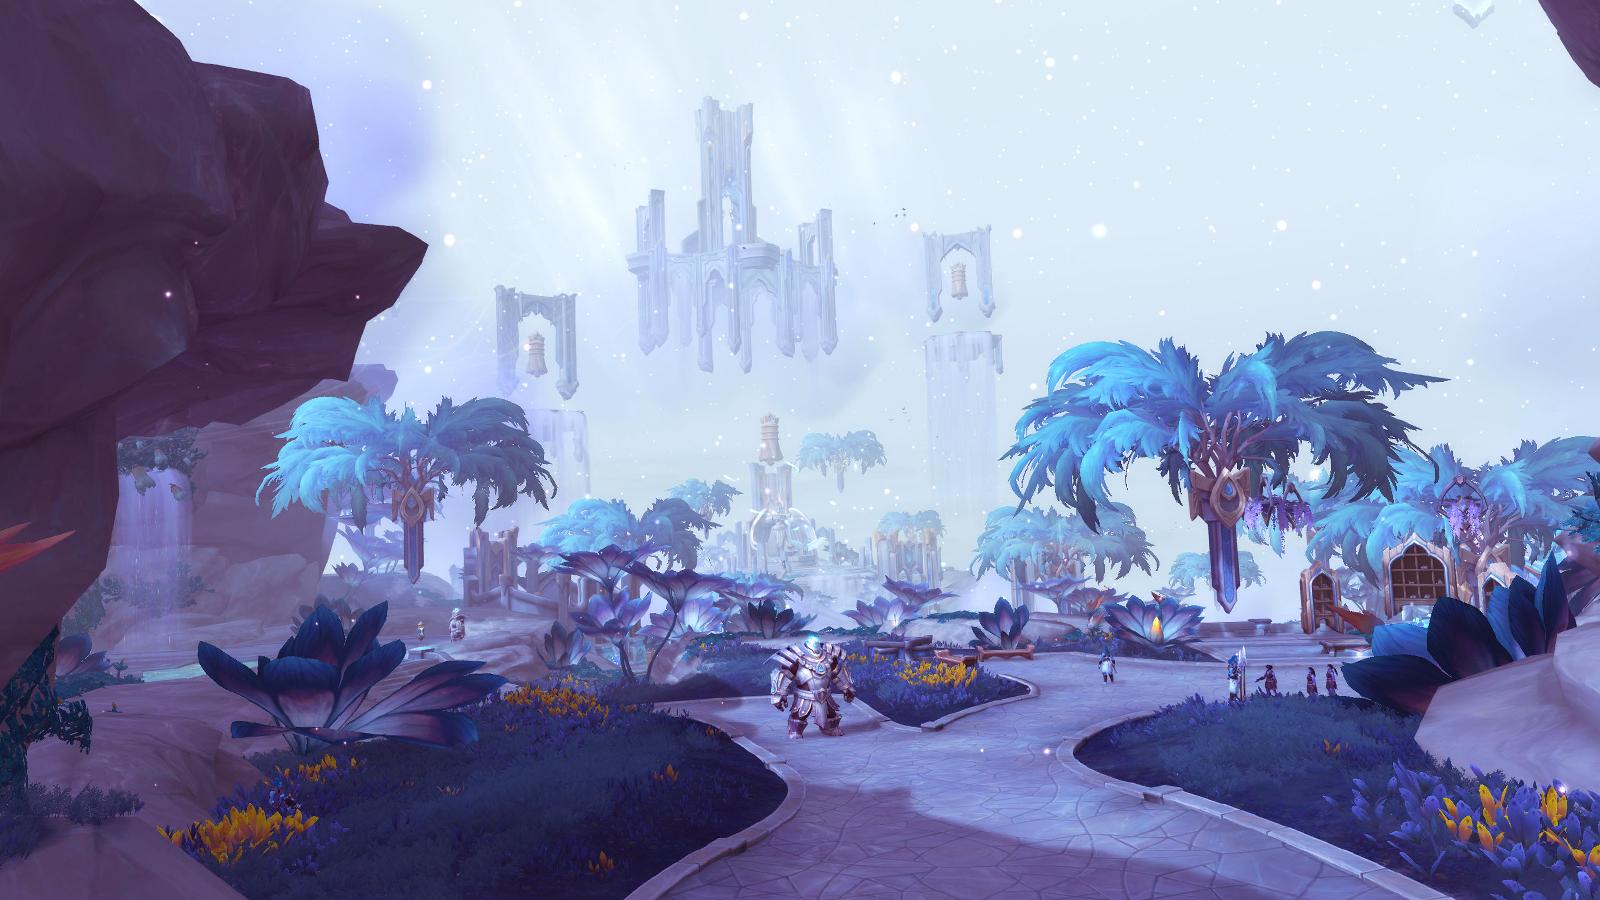 Bastion's zone in WoW, showcasing beautiful celestial buildings